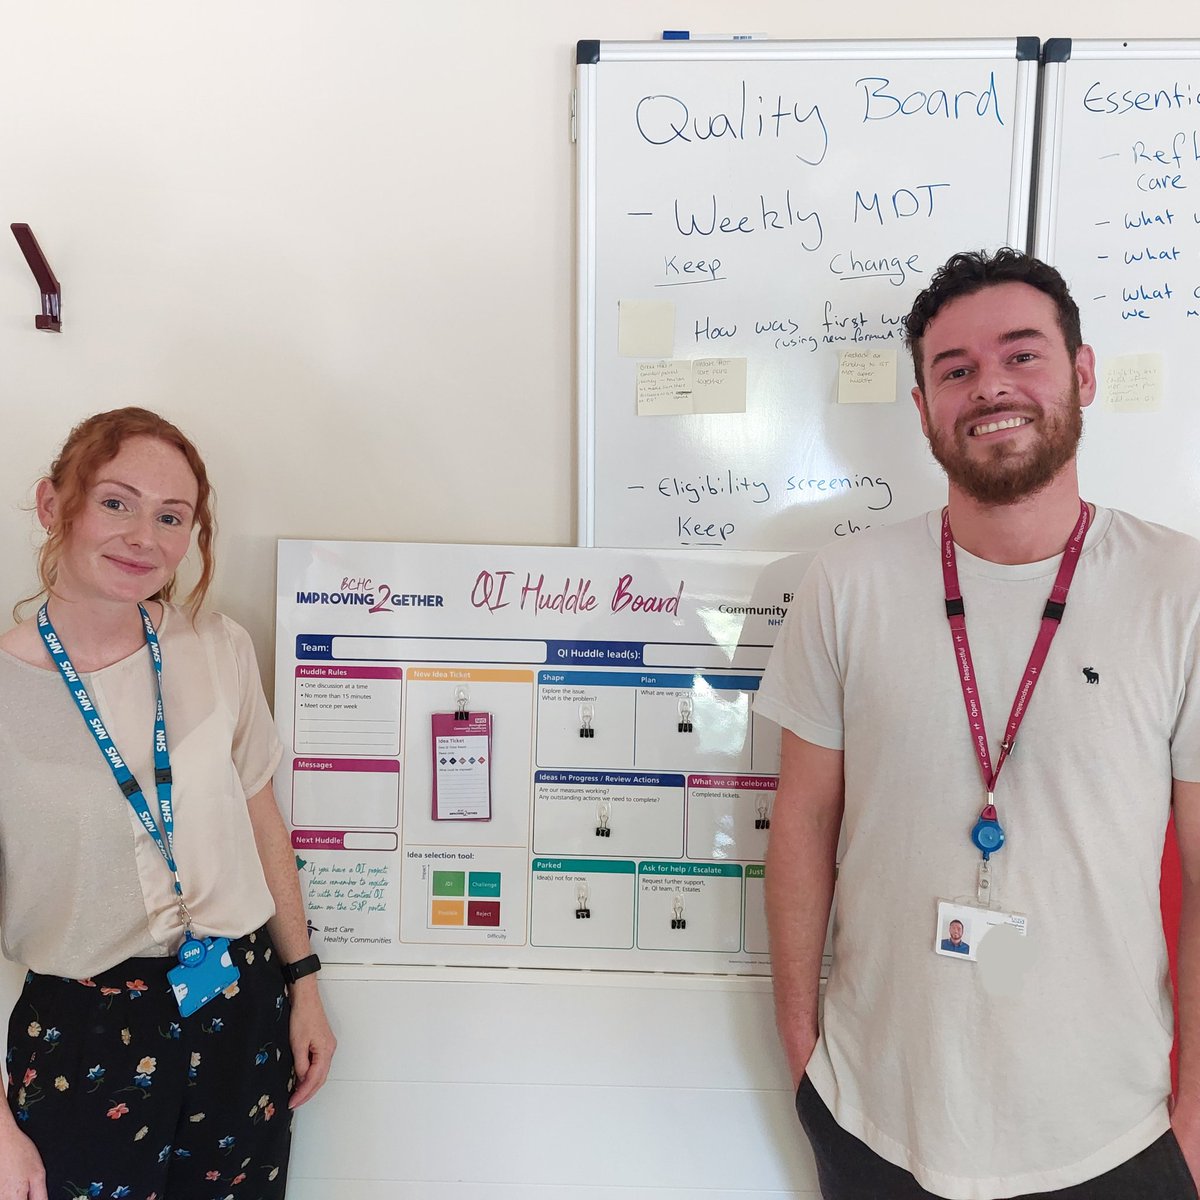 Out and about today delivering QI Huddle boards & tickets to our Intensive Support Team and Referral Management Centre, great to see both teams were already using the QI huddle approach 💙 #Qualityimprovement #qihuddles